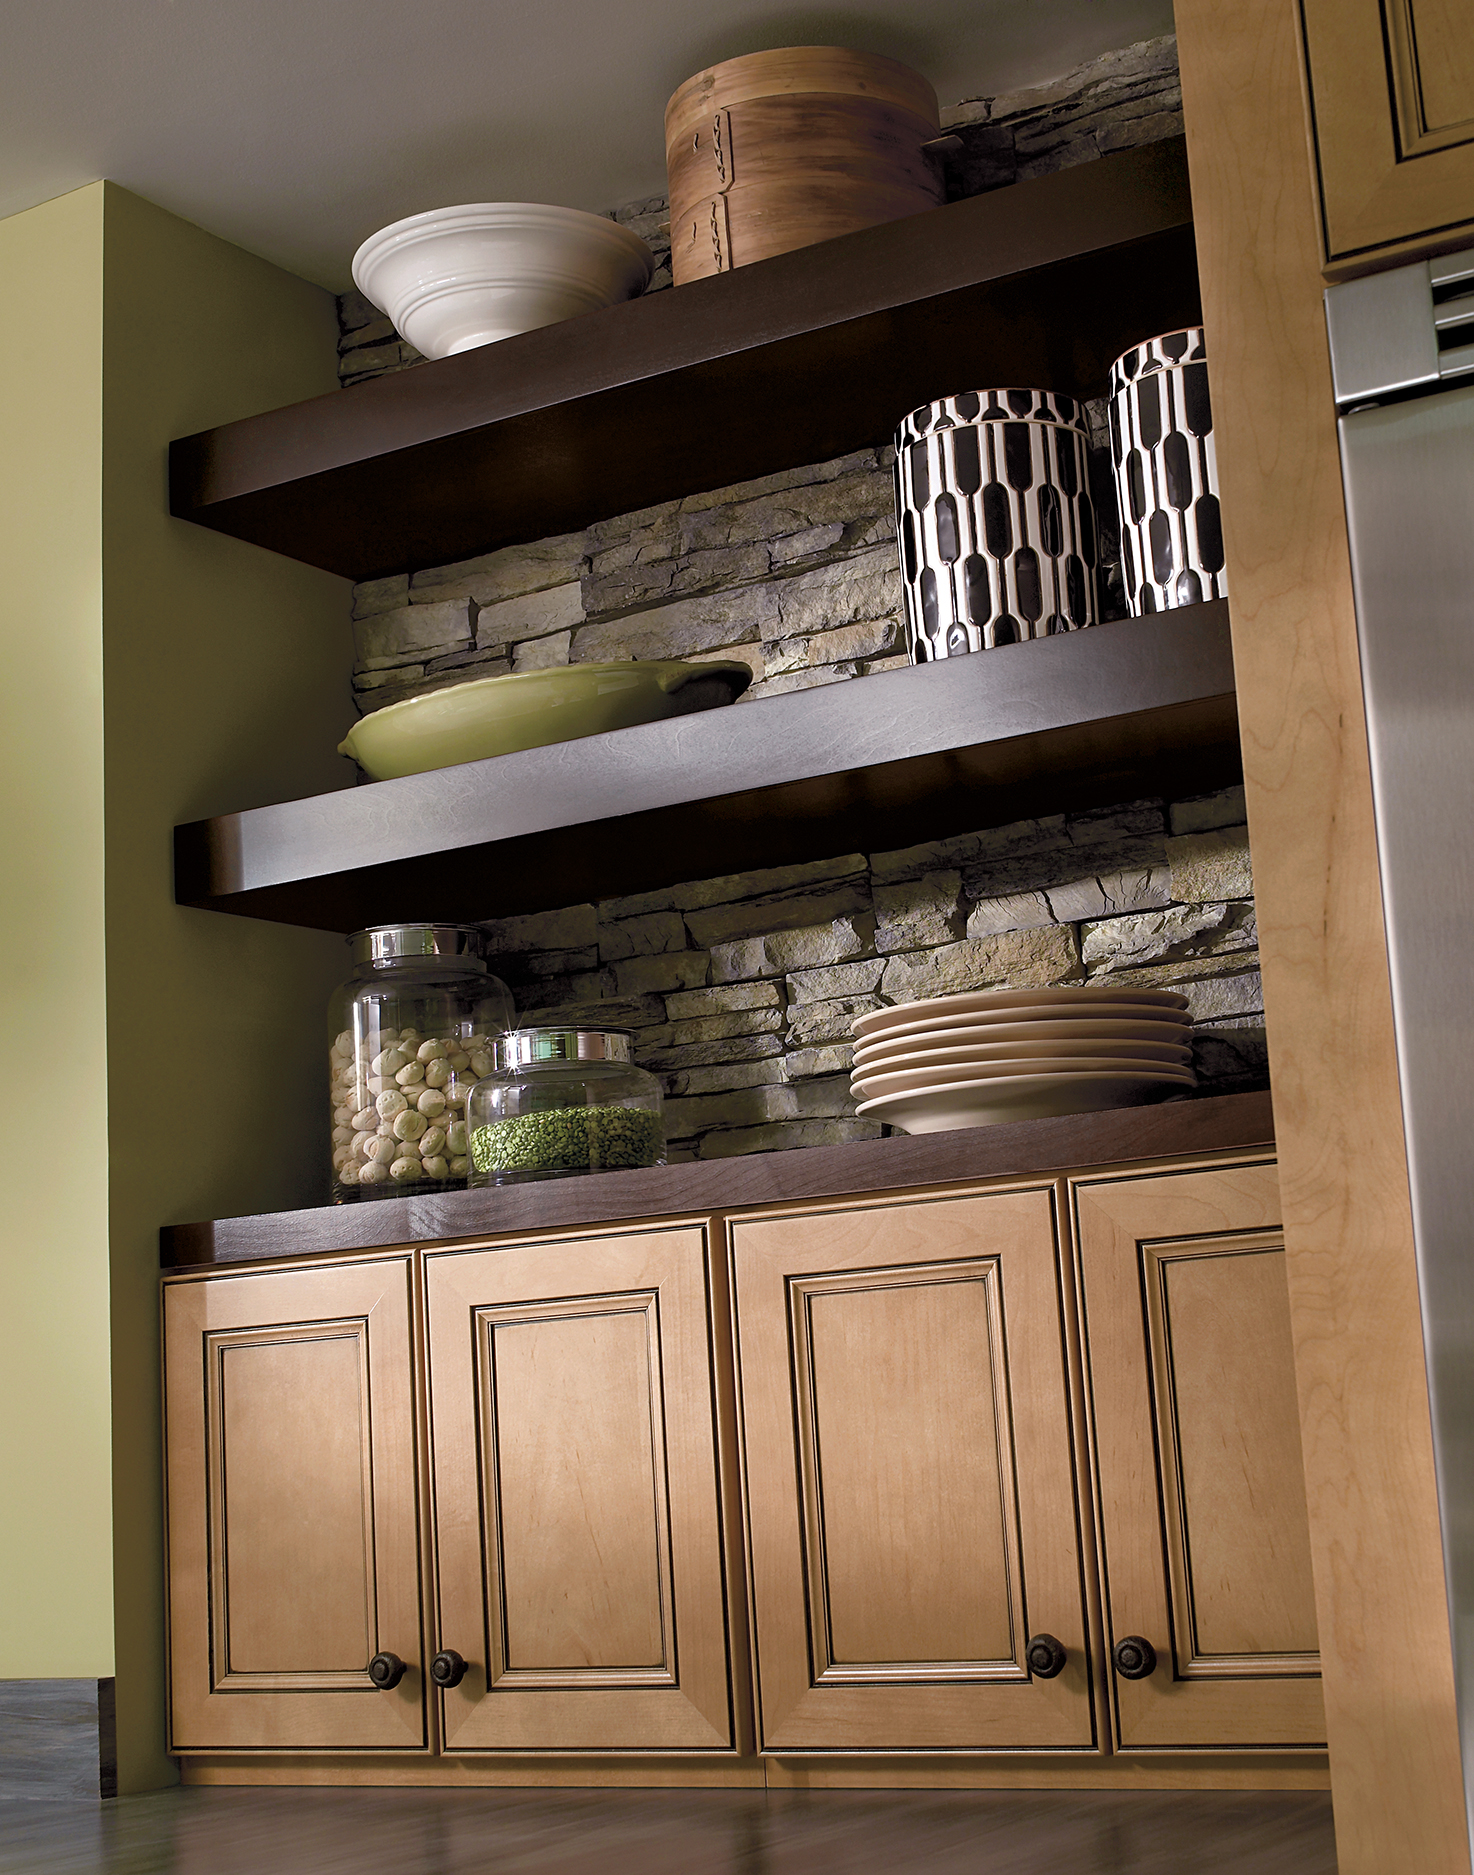 Homecrest Cabinetry